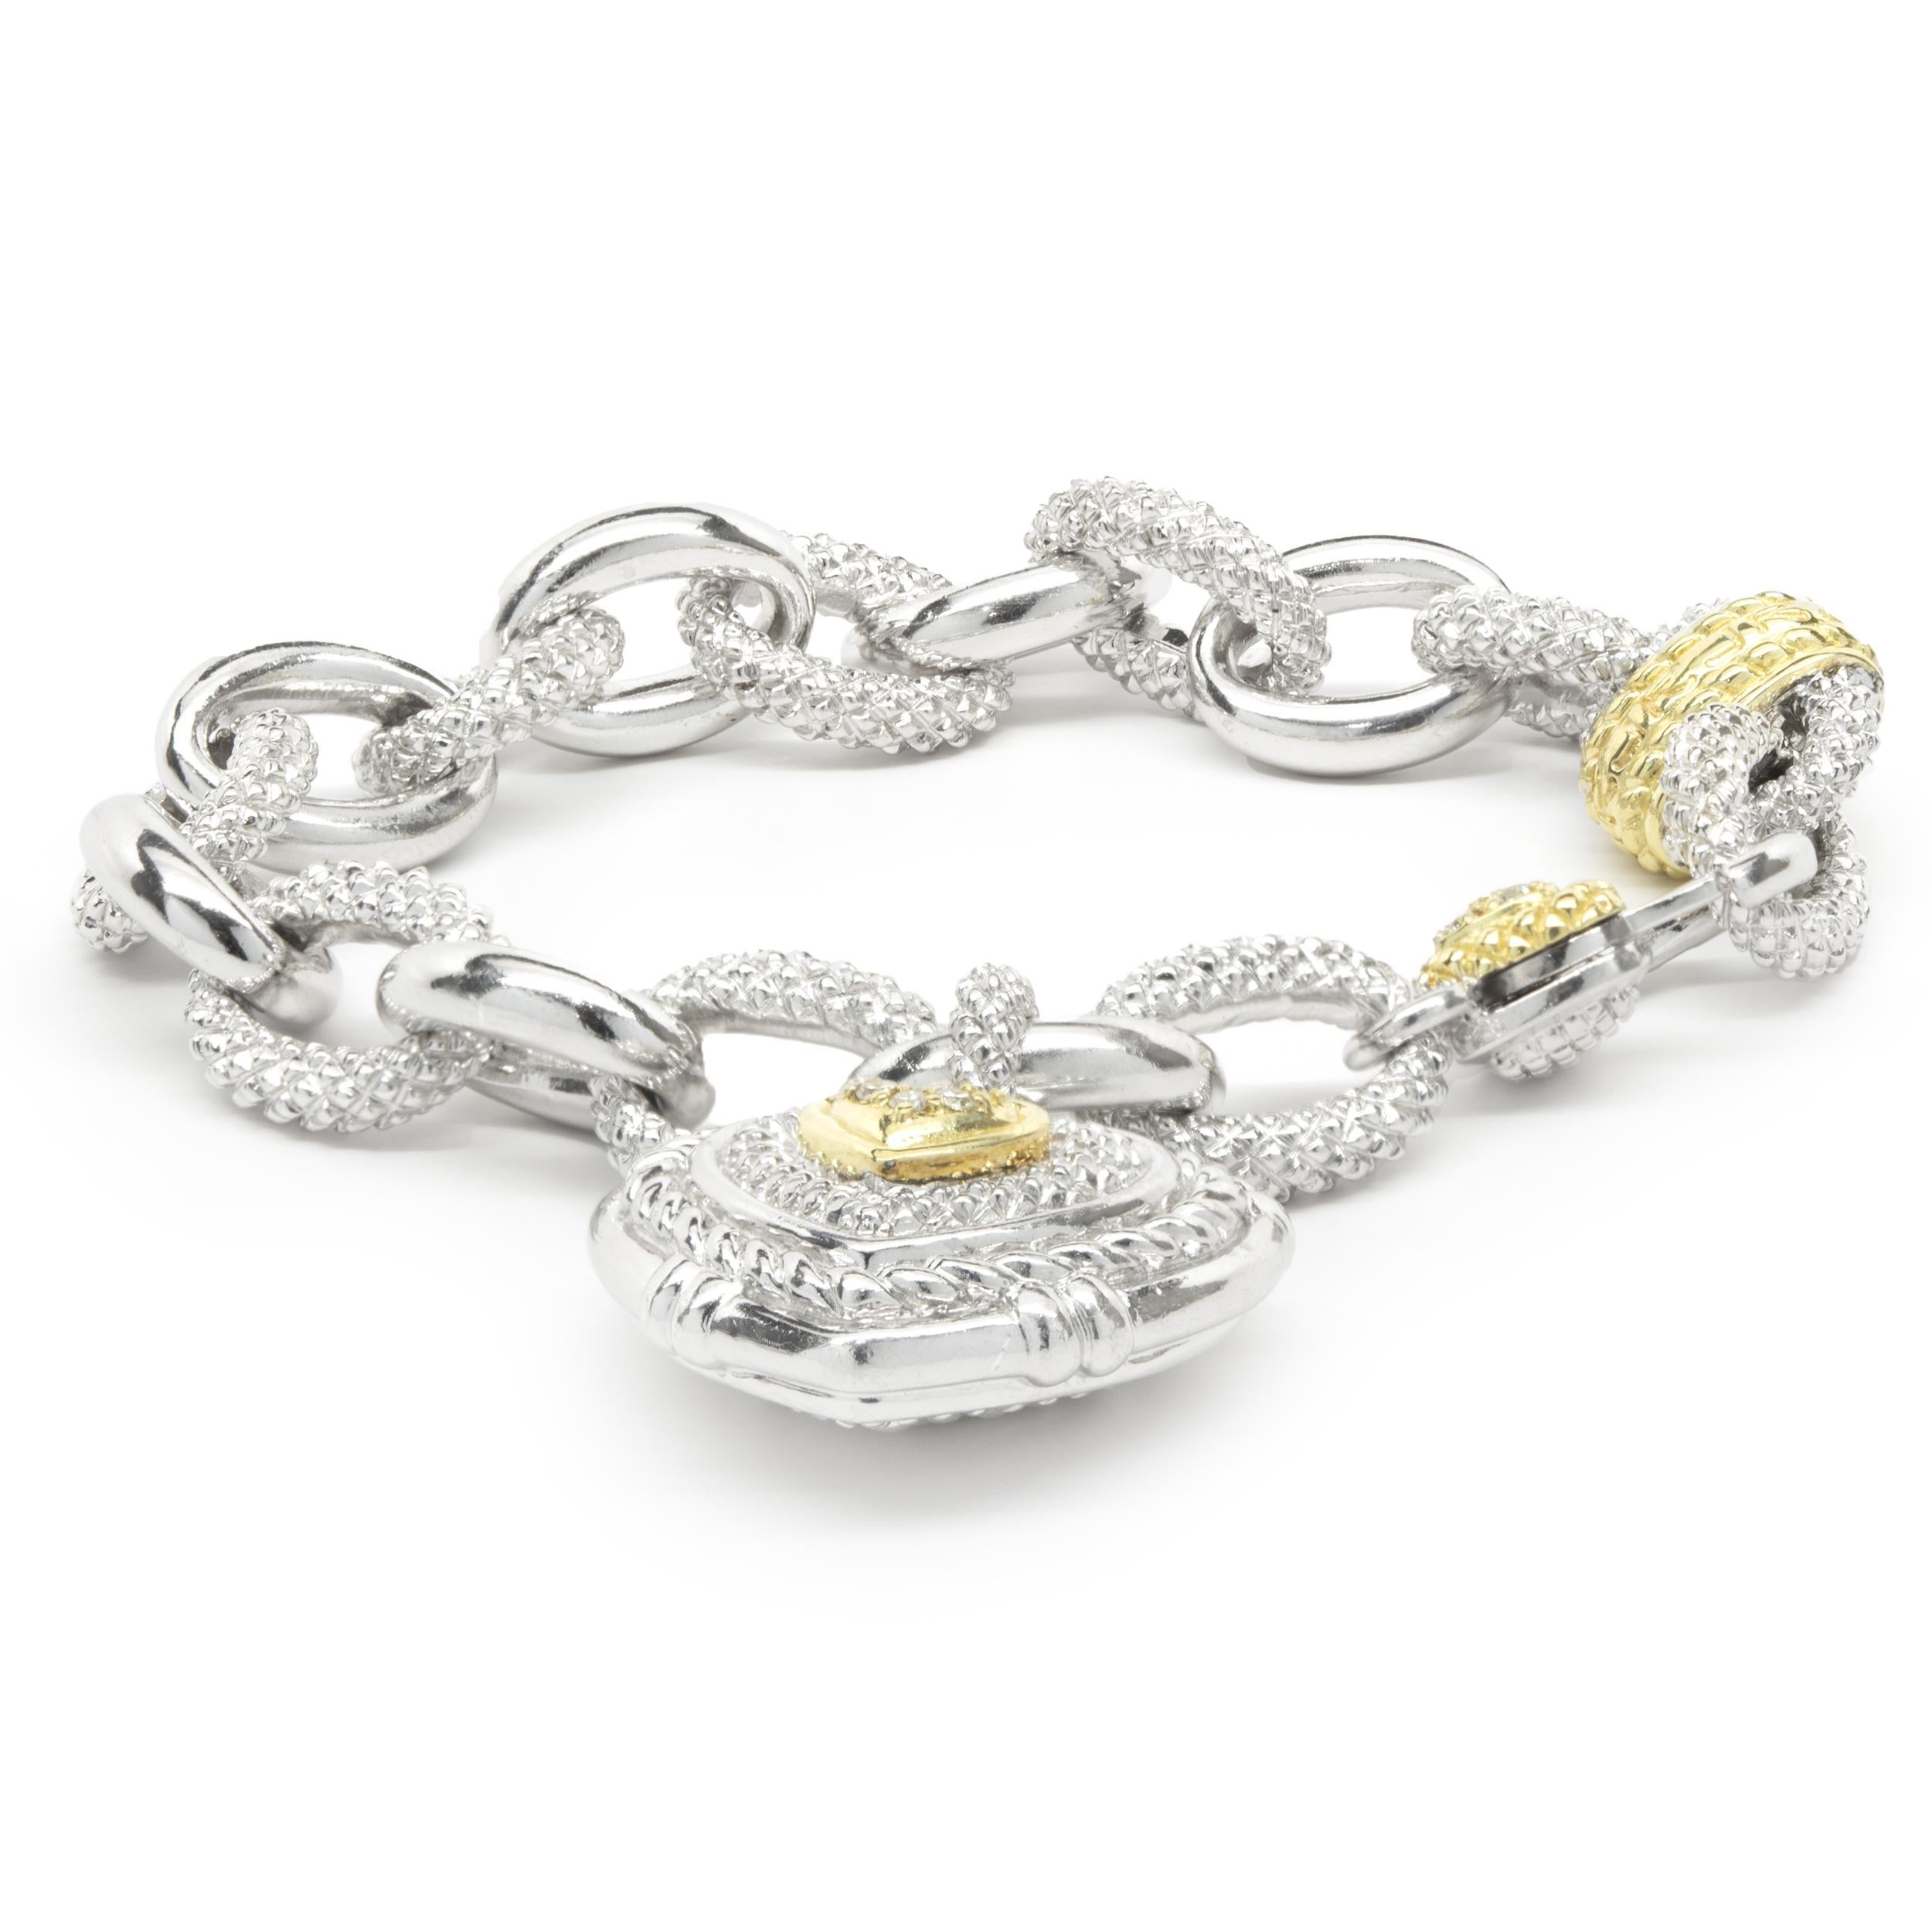 Designer: Judith Ripka
Material: sterling silver
Diamond: 6 round cut = .16cttw
Color: H
Clarity: SI1
Dimensions: bracelet measures 8-inches long
Weight: 72.66 grams
